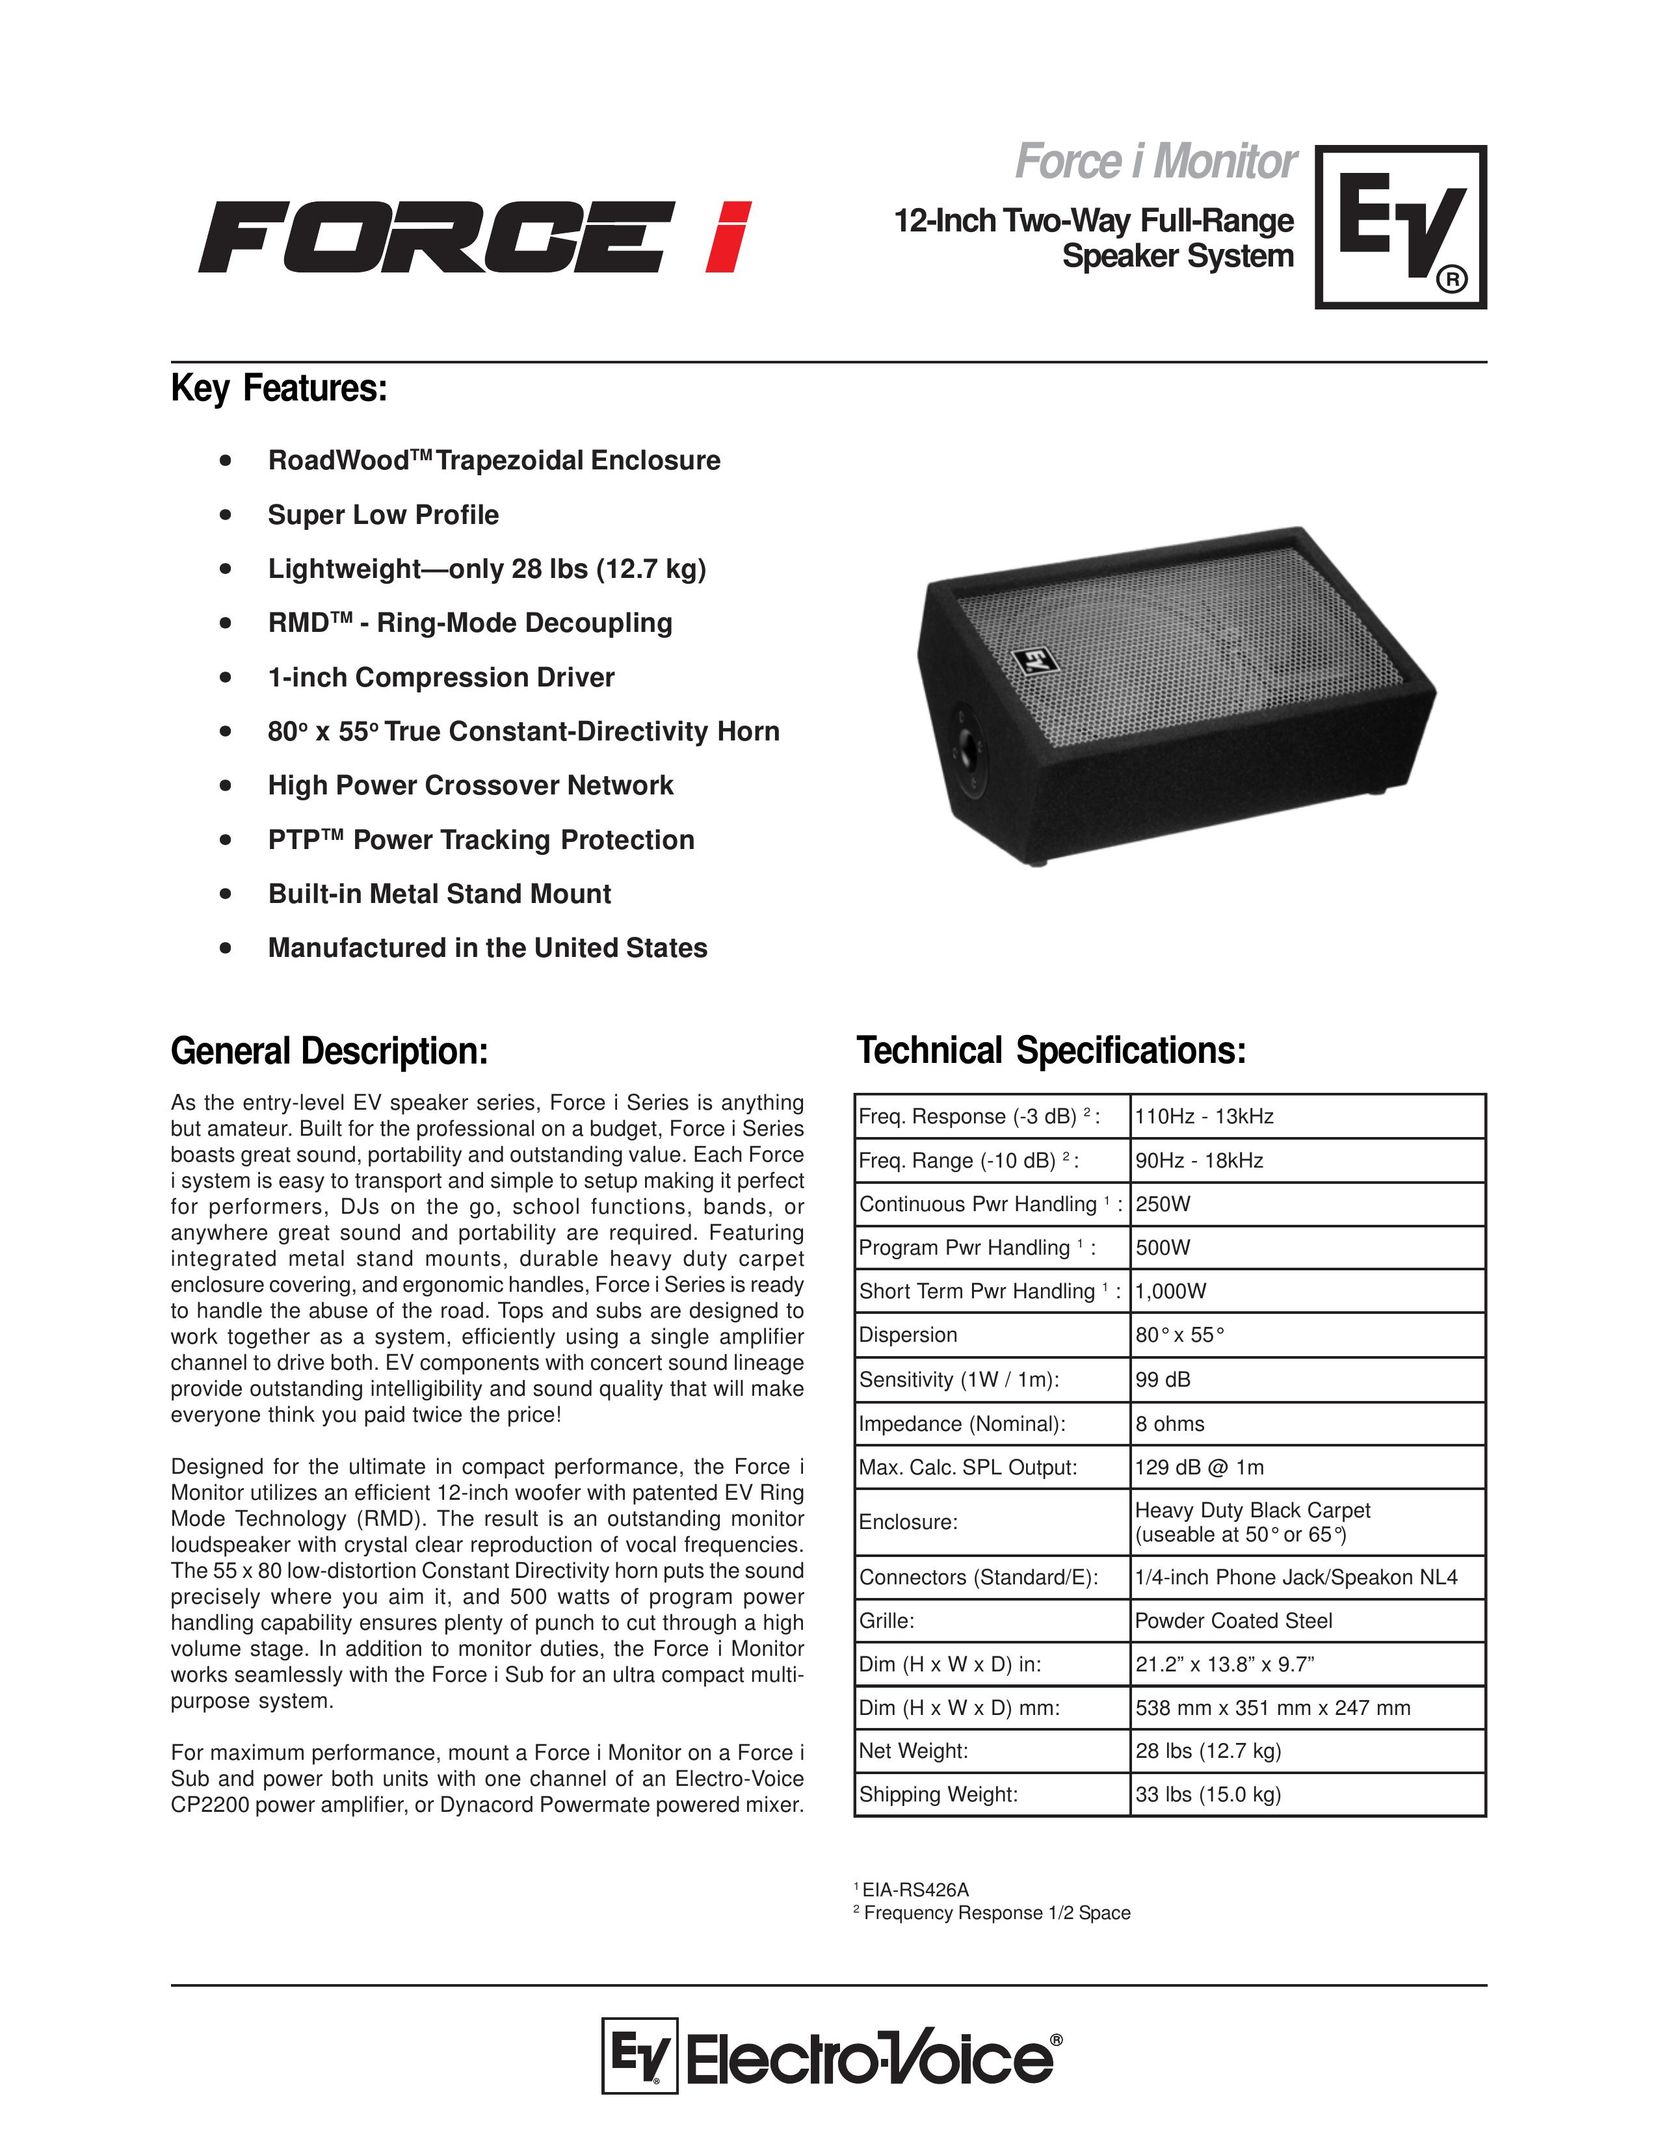 Electro-Voice Force i Monitor Speaker System User Manual